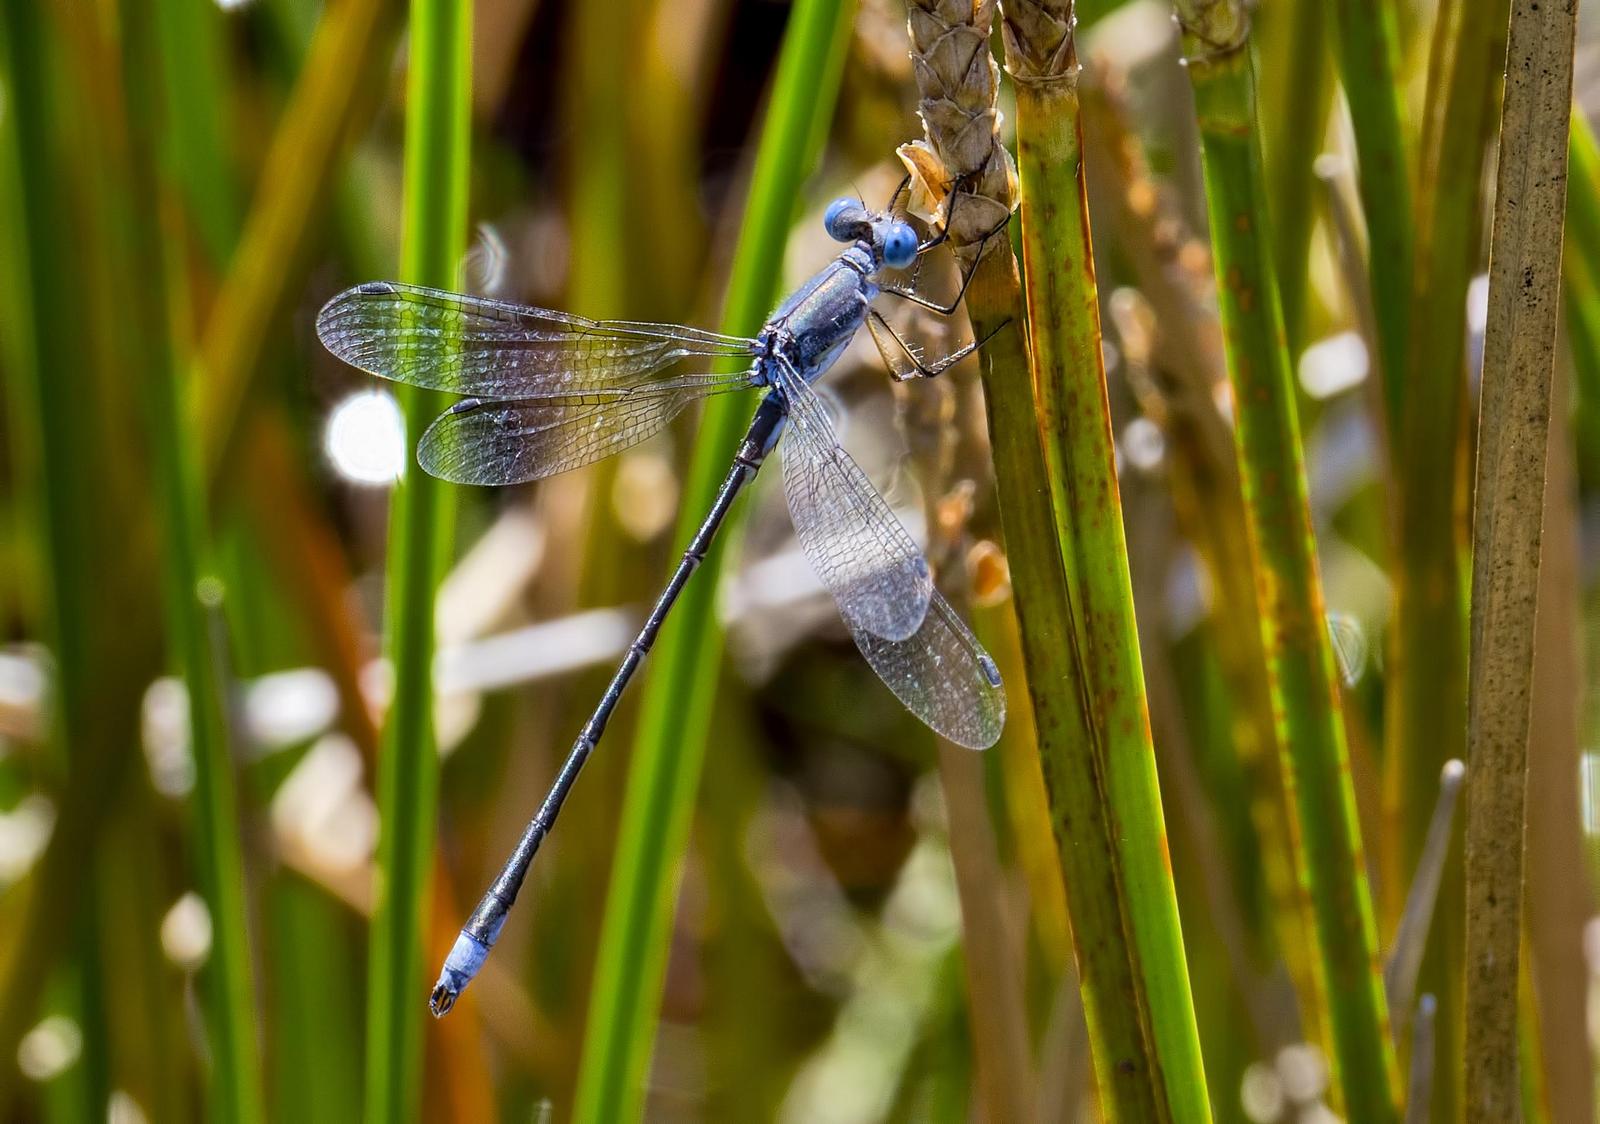 Sweetflag Spreadwing Photo by Michael Moore